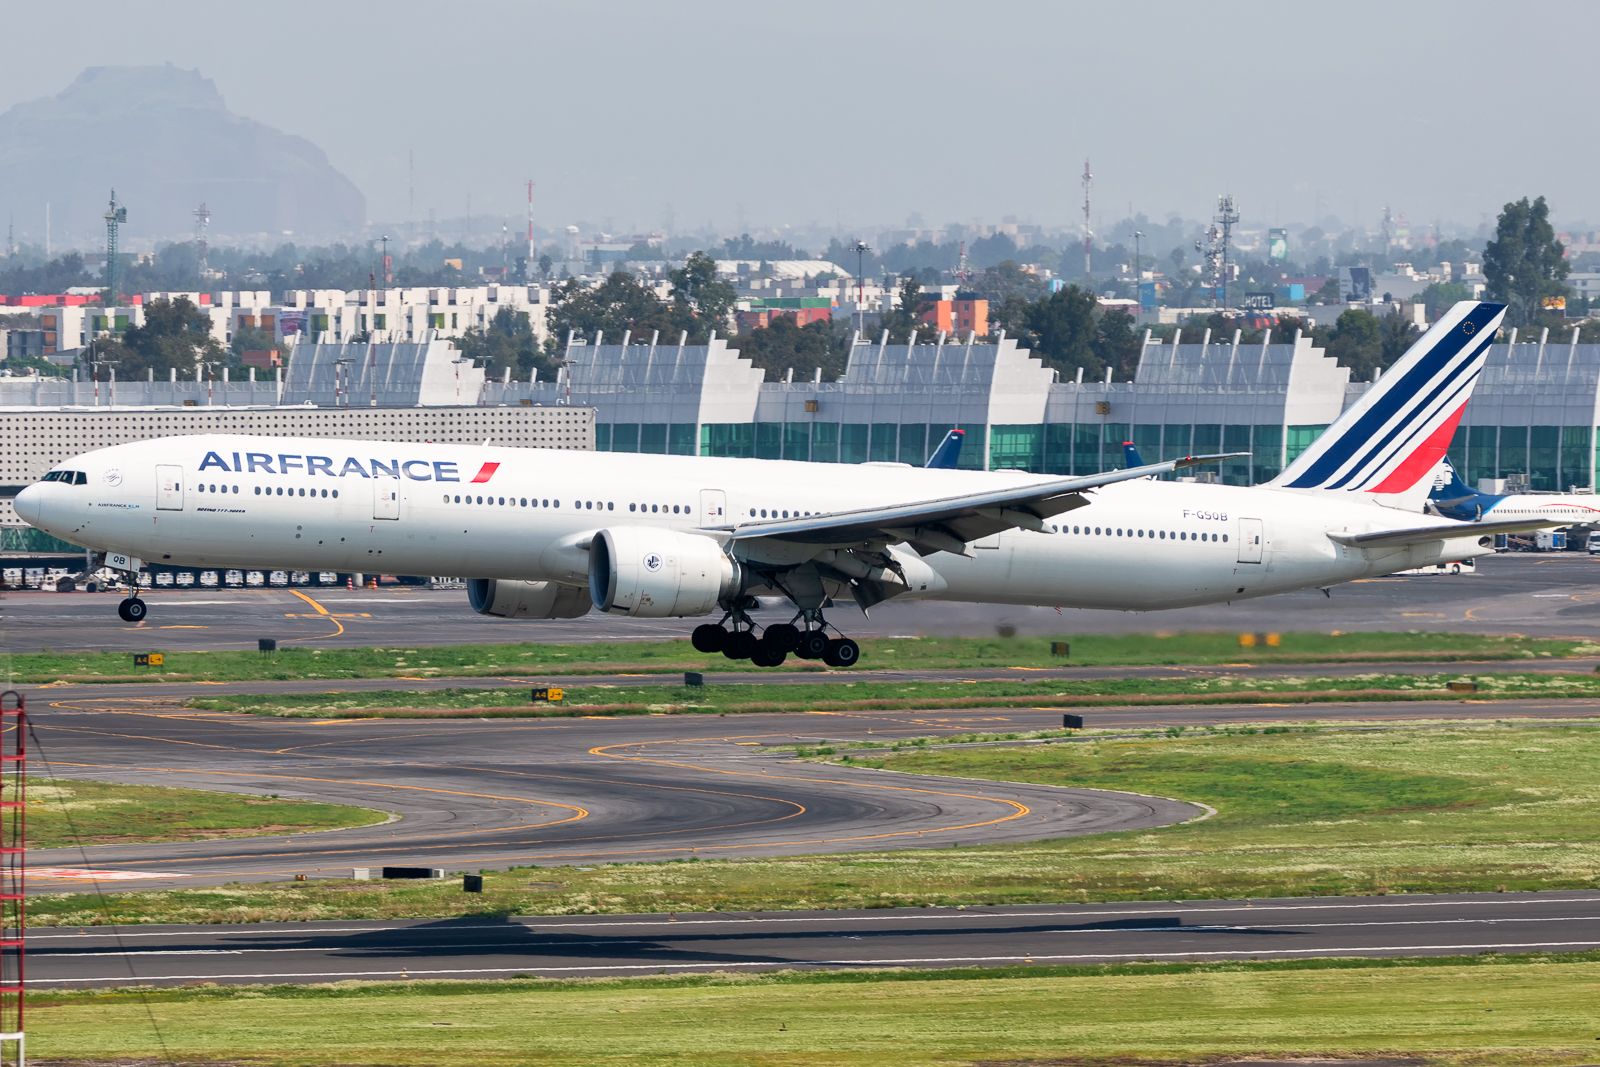 An Air France Boeing 777-300ER about to land at an airport.